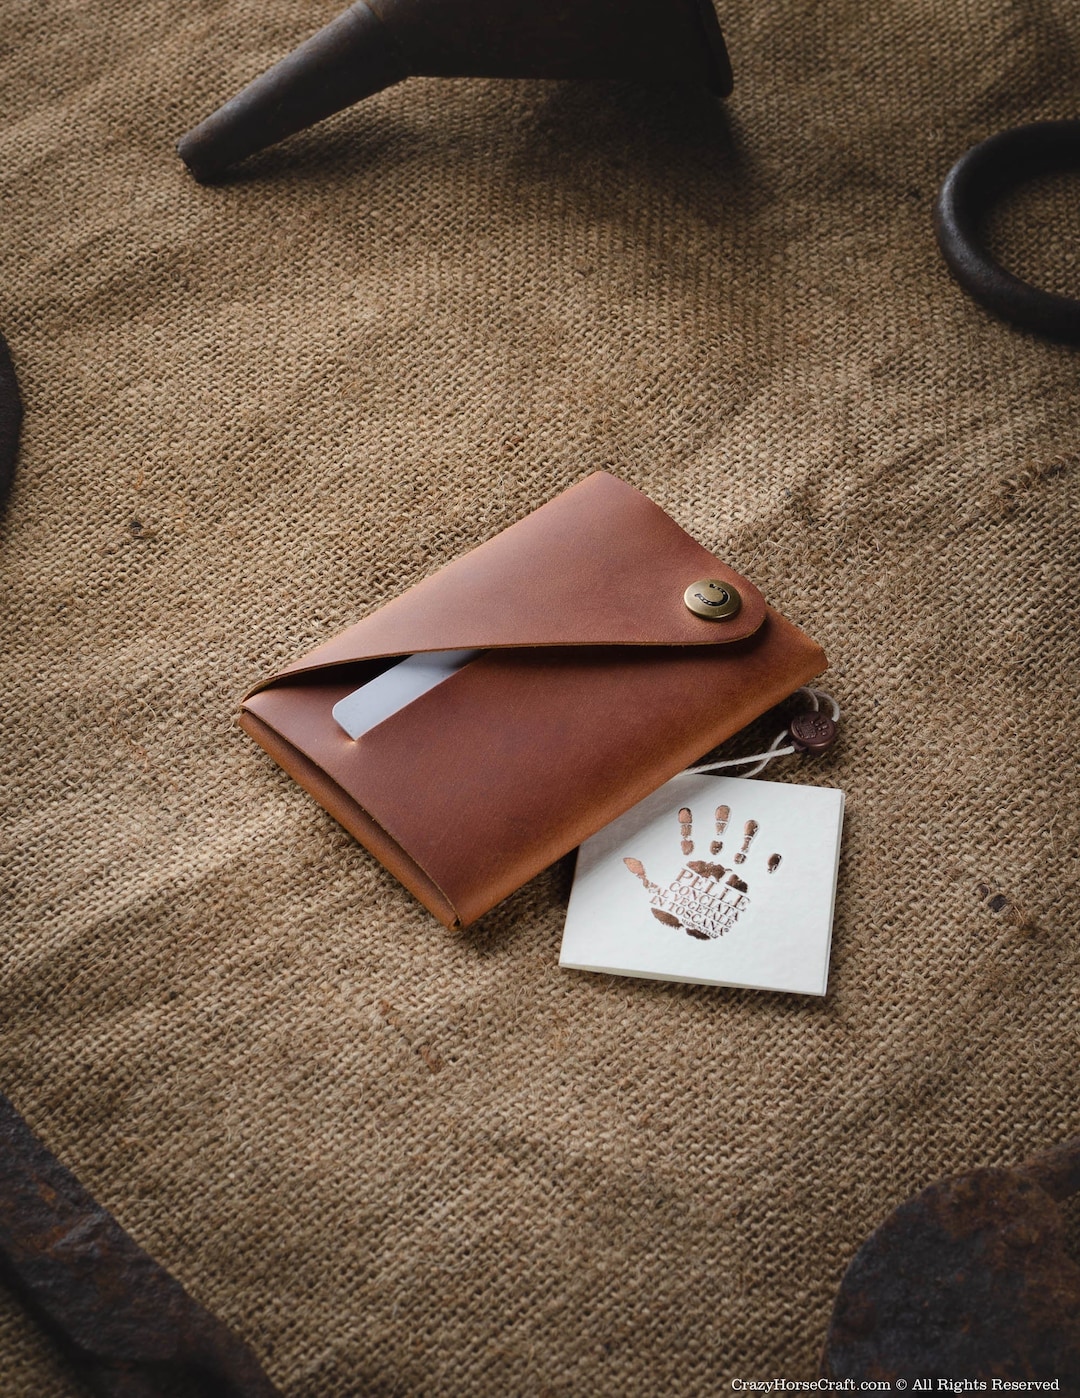 Chiara-Women's handmade leather wallet with two snap button